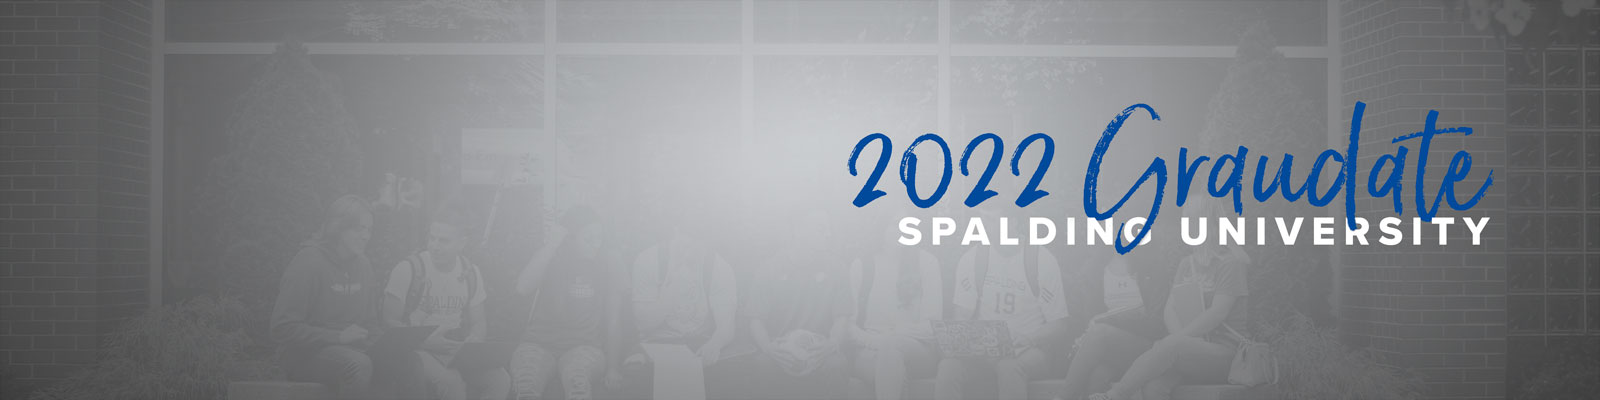 Spalding University graduate social media background, group of students, gray with blue and white text